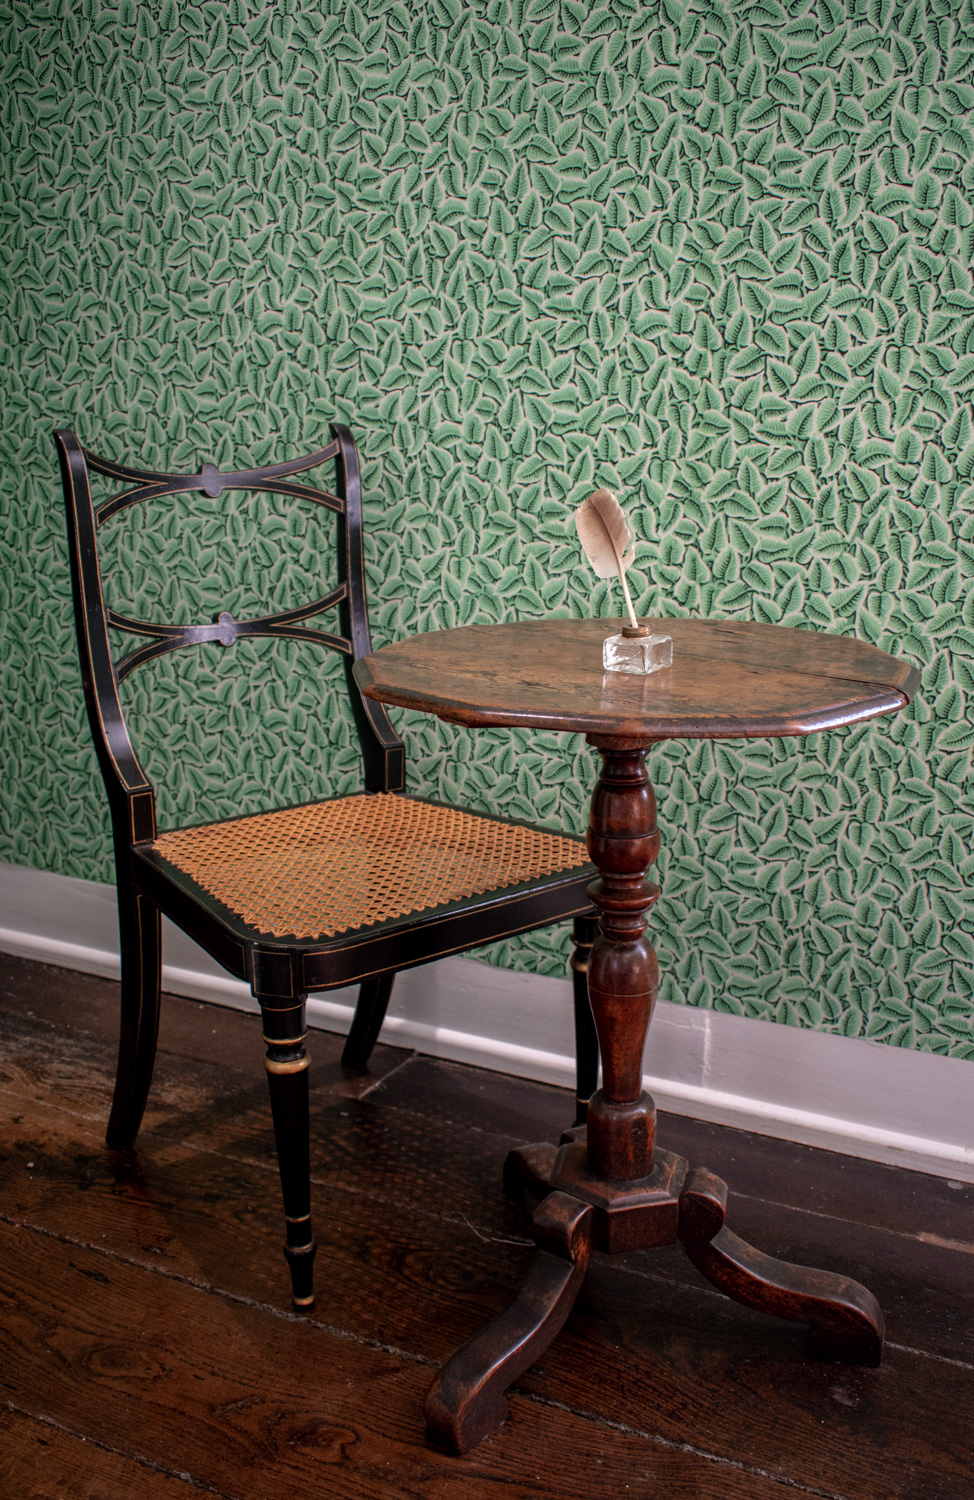 Jane Austen's writing table set against the Chawton Leaf wallpaper in the Dining Parlour